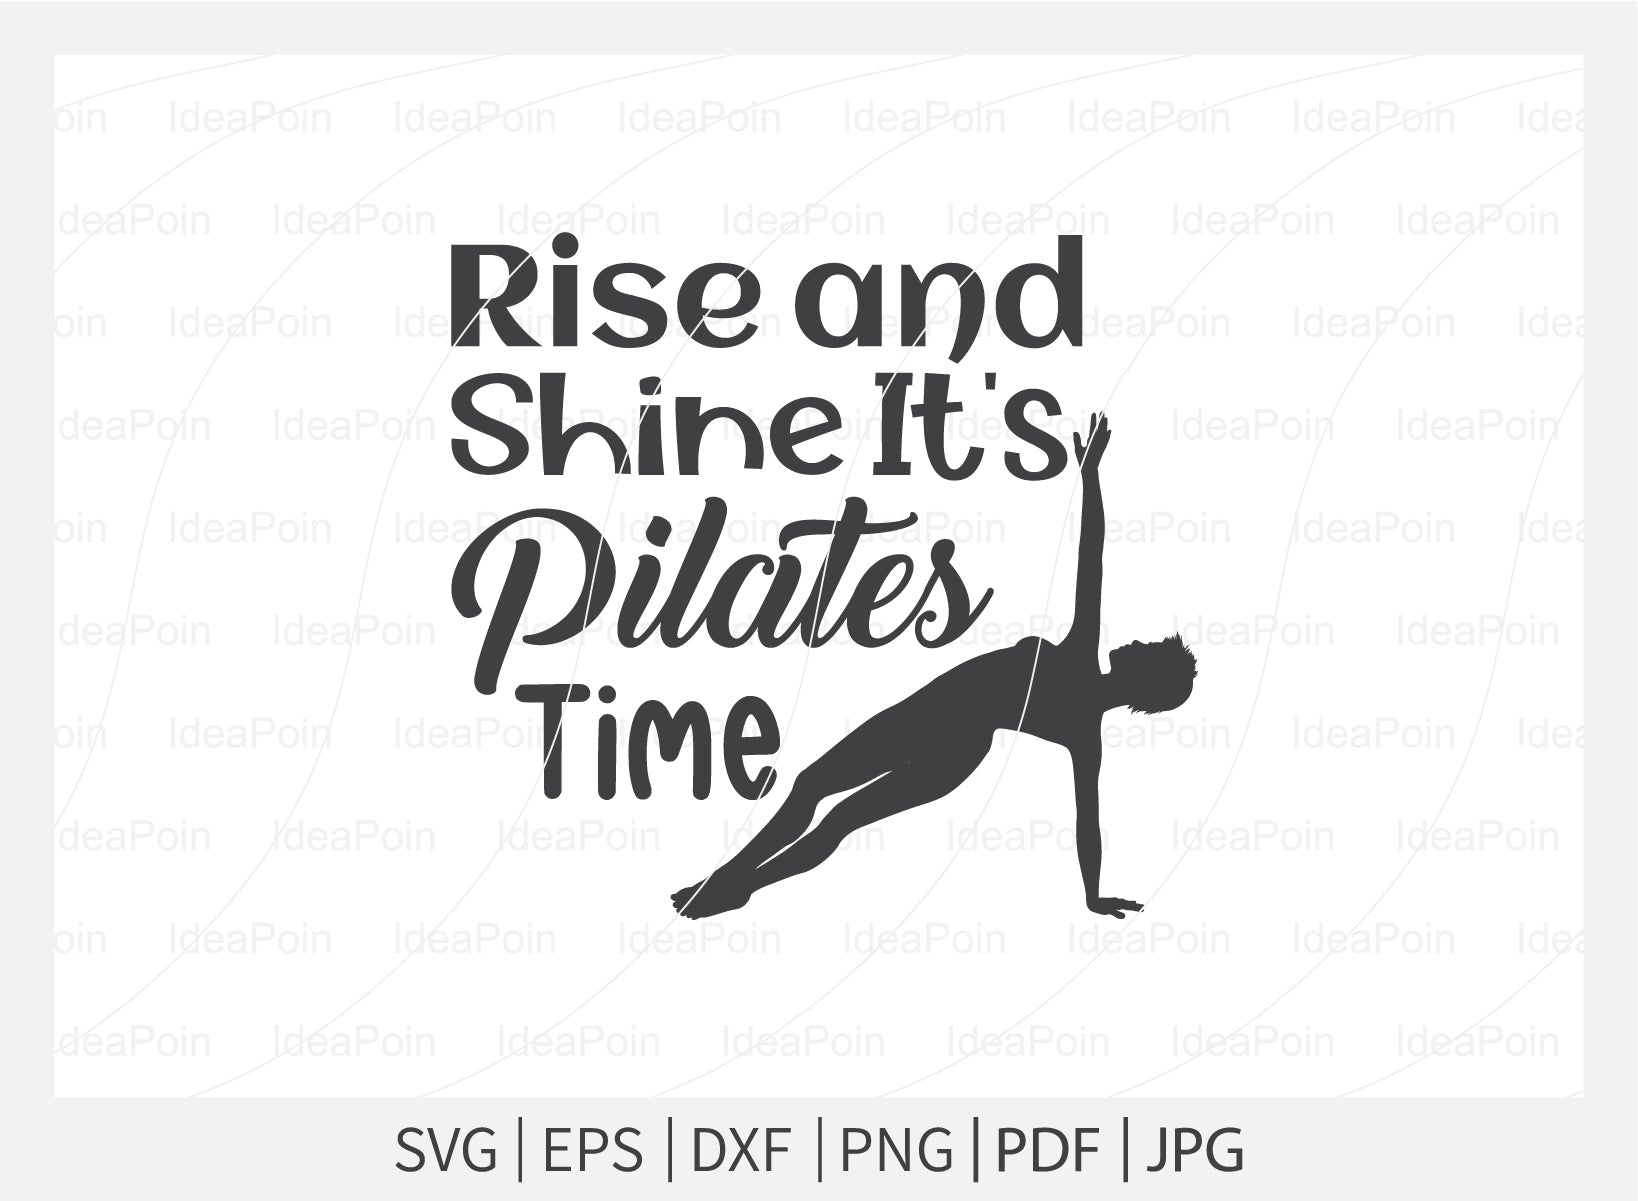 Rise & shine it's pilates time Svg, Pilates Svg, Pilates Svg bundle, funny  pilates Svg, Pilates ball training quotes, Pilates Png, Pilates Dxf, Cut  Files for Crafters, Svg file - So Fontsy